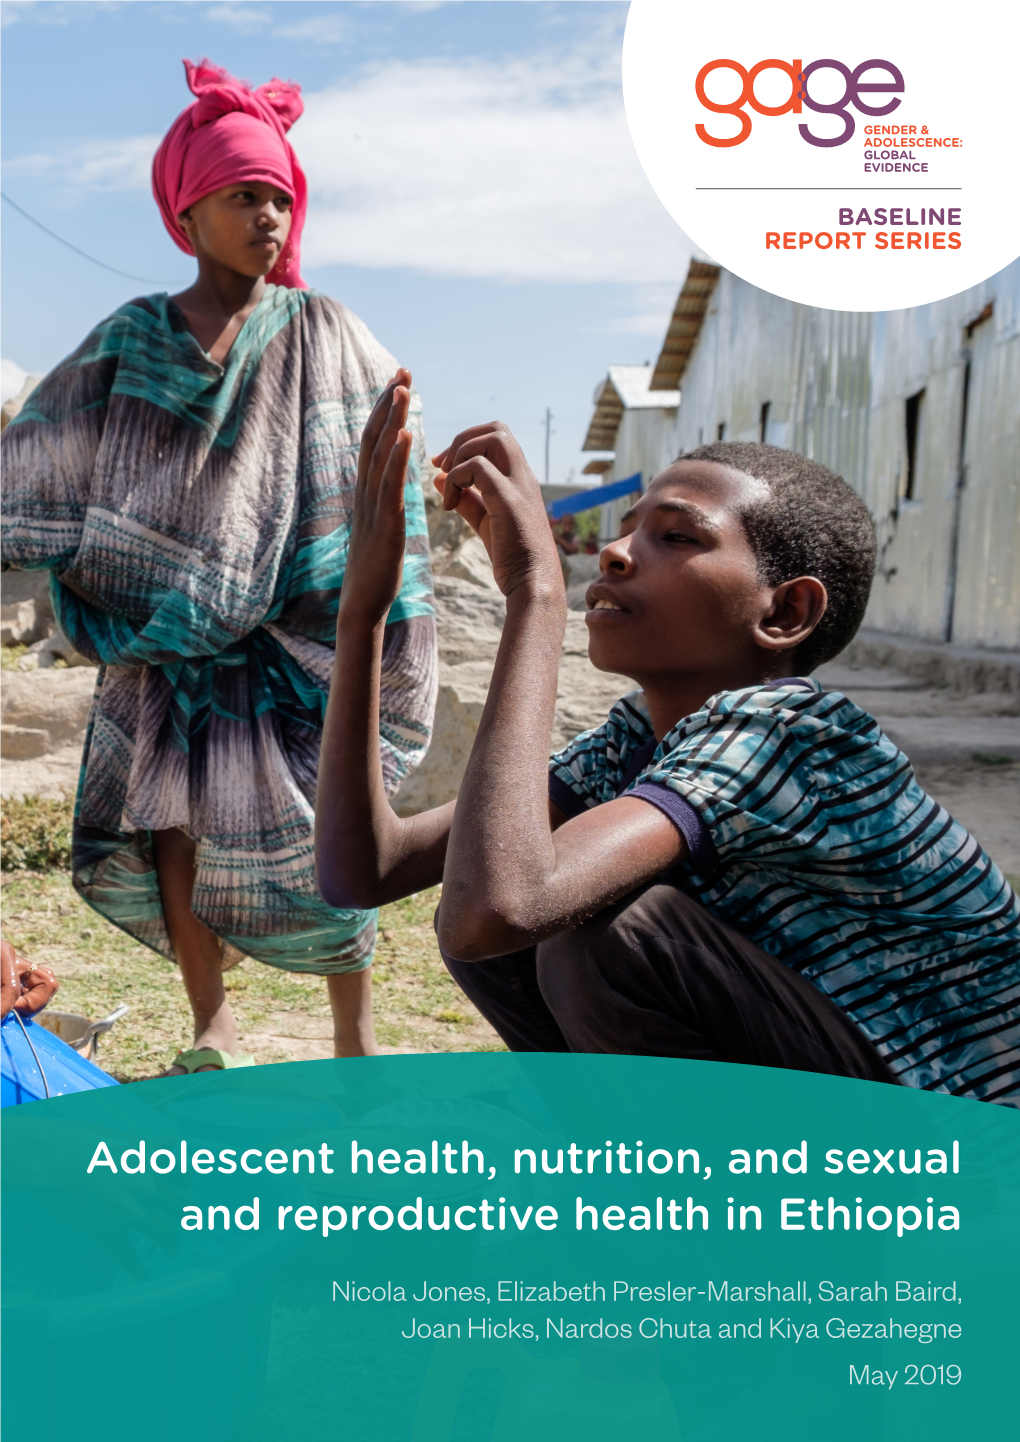 Adolescent Health, Nutrition, and Sexual and Reproductive Health in Ethiopia